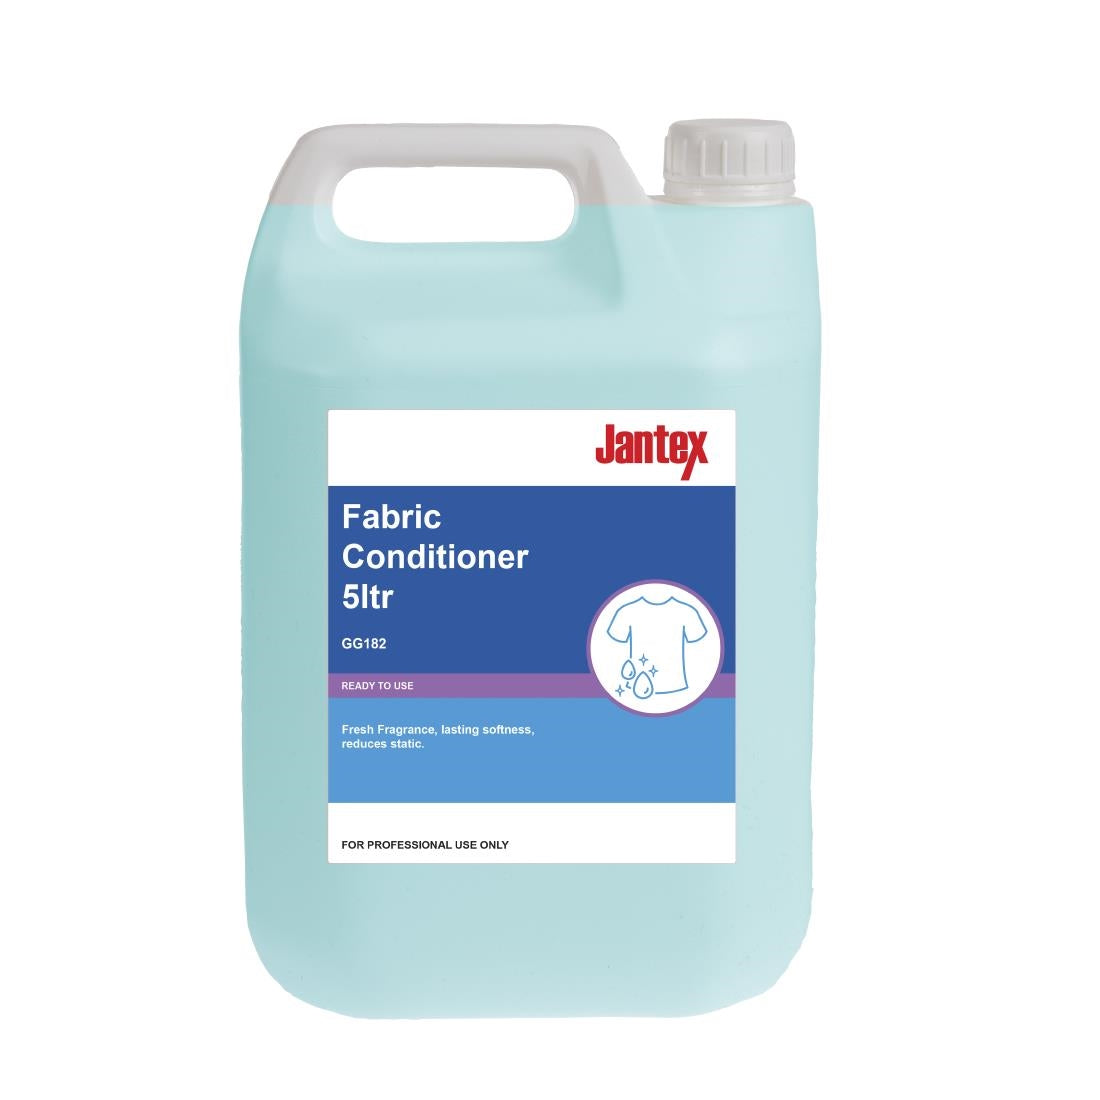 Jantex Fabric Conditioner Concentrate 5Ltr JD Catering Equipment Solutions Ltd